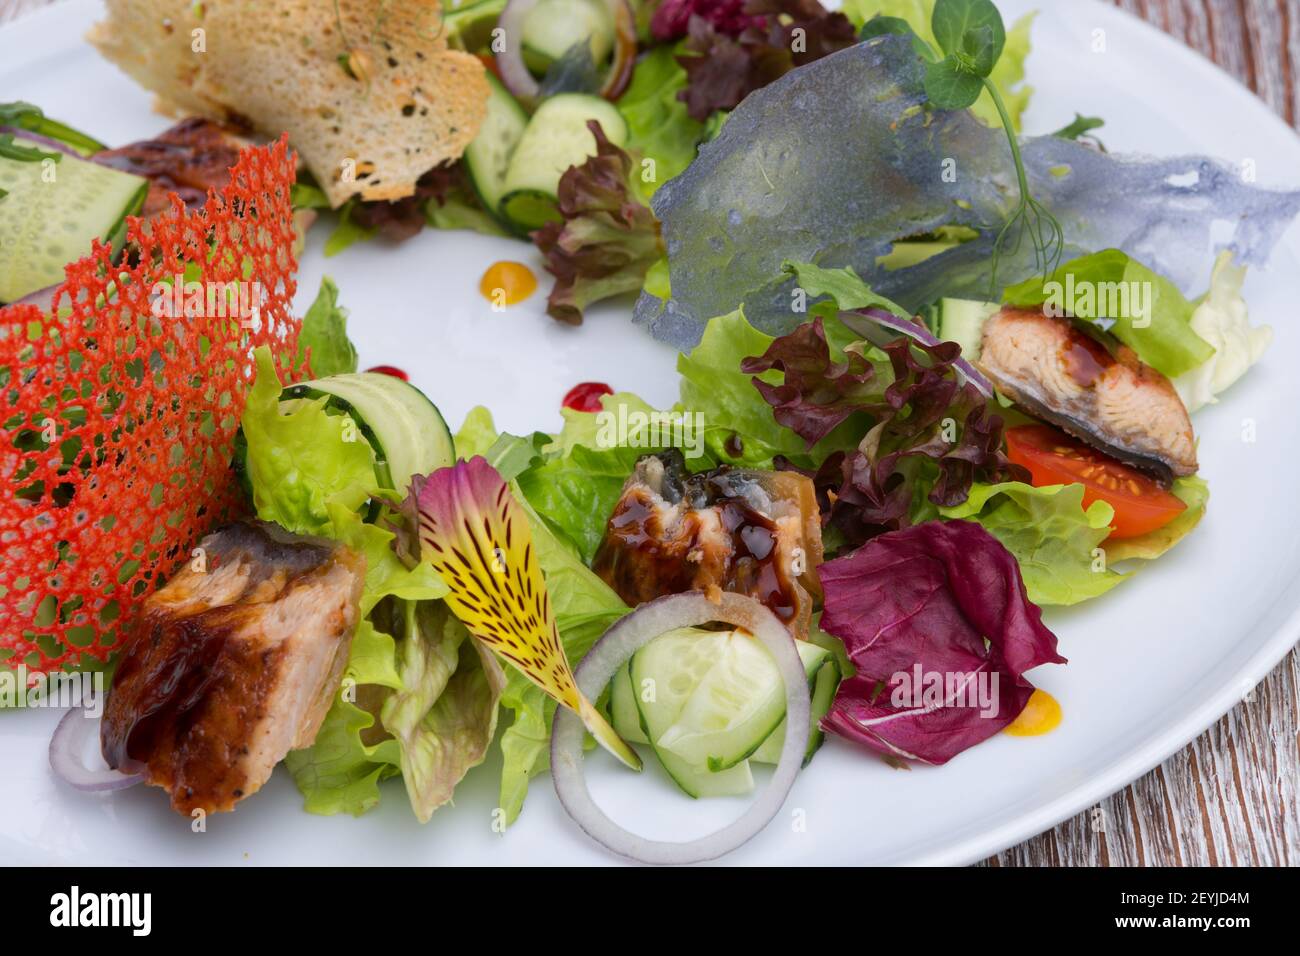 Vegetable salad with eel, on a plate Stock Photo